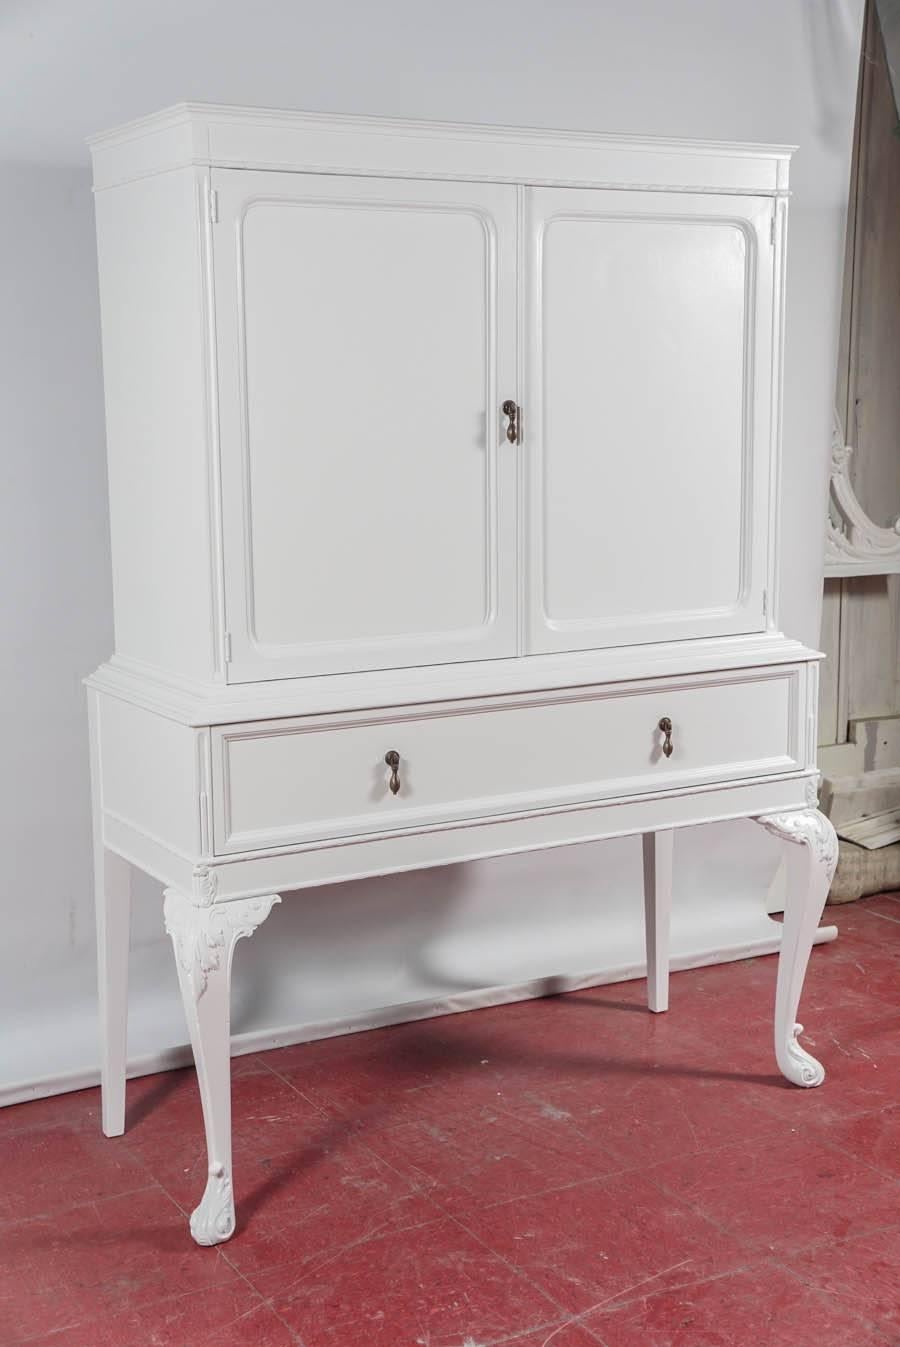 Freshly painted white, the early 20th century china cabinet has one generous size dovetail drawer and two shelves behind a pair of paneled doors. One shelf has slots for angling plates.